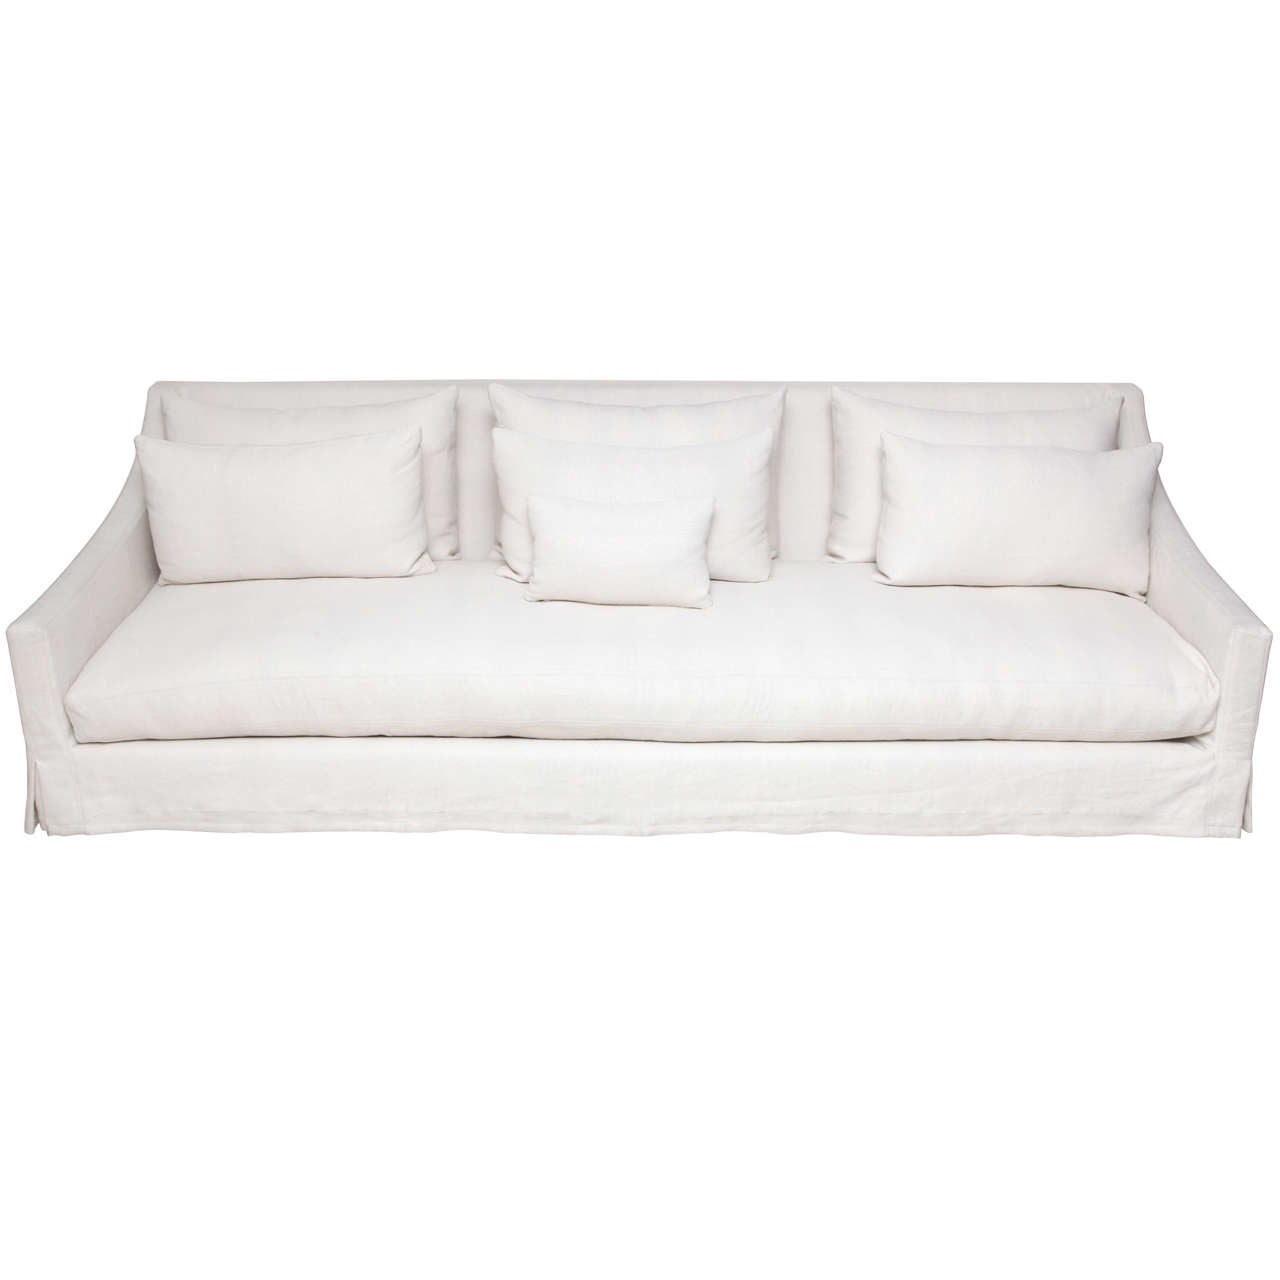 Lucca & Co., Made to Order Spoleto Sofa